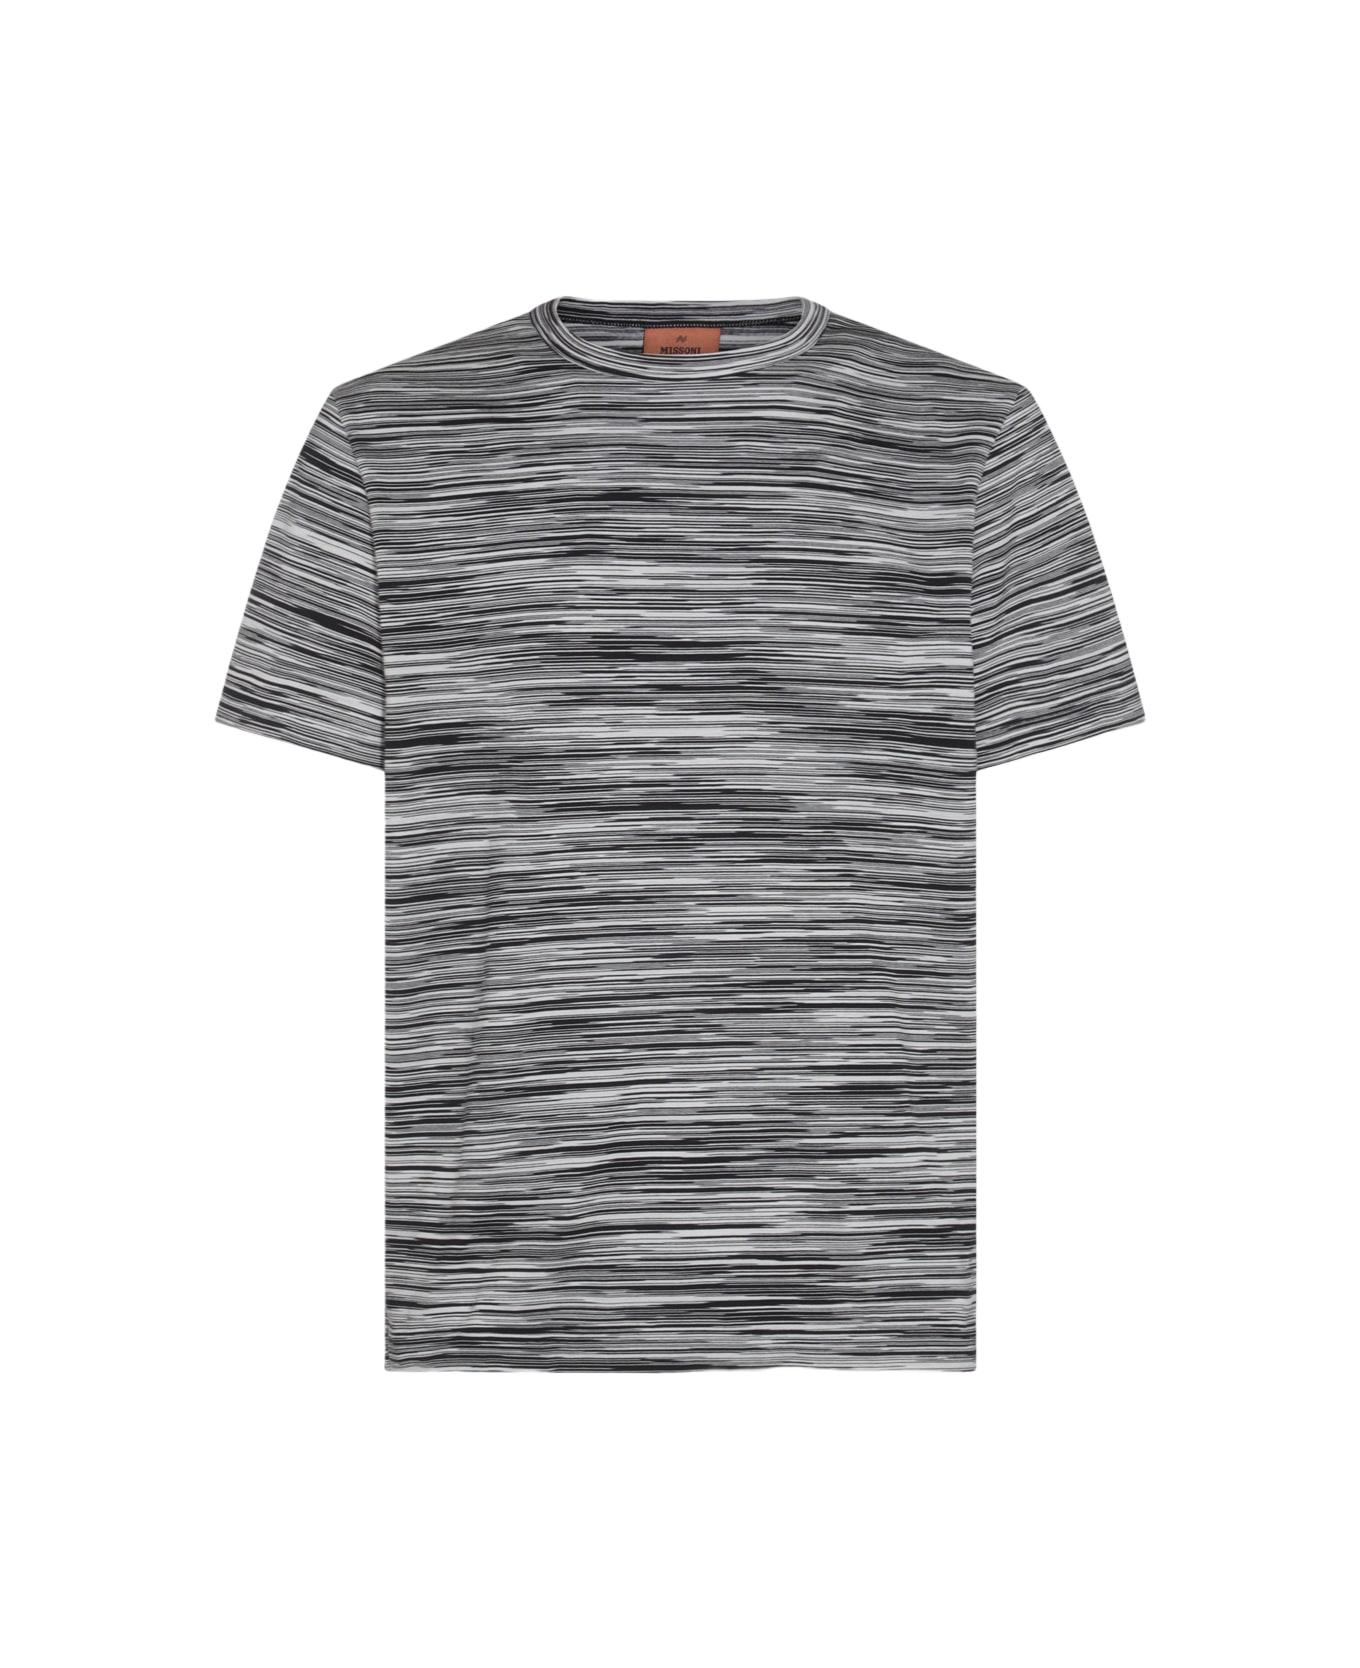 Missoni Multicolor Cotton T-shirt - SPACE DYED BLACK AND WHITE